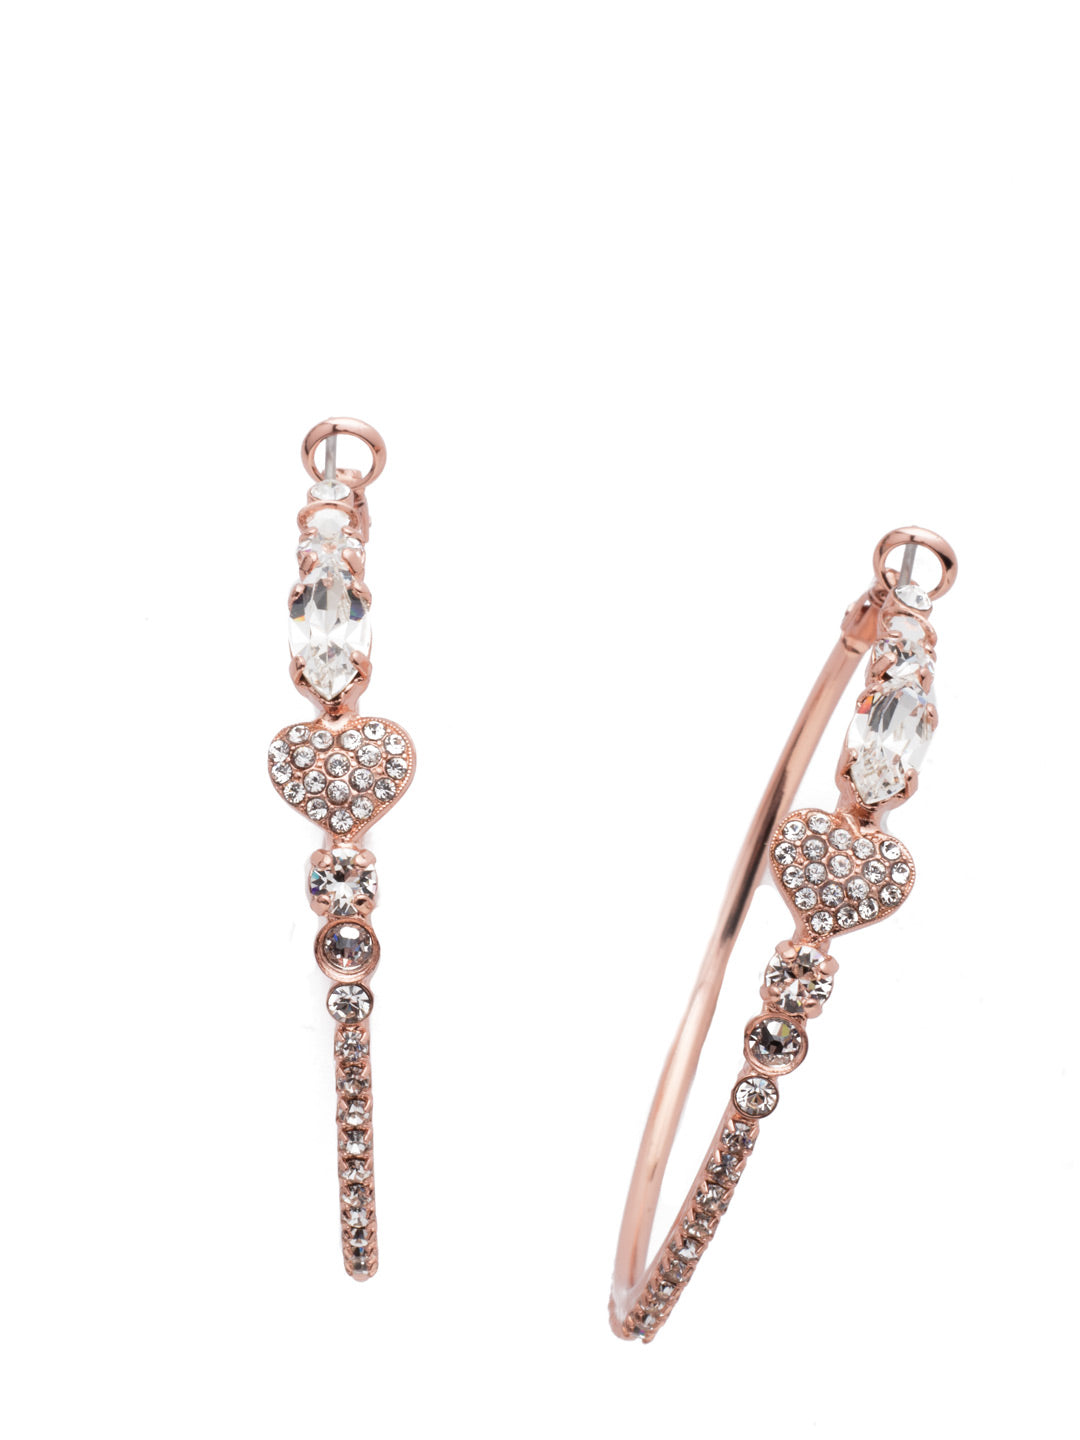 Ashton Hoop Earrings - EER50RGCRY - <p>Bling on classic hoop style and sparkle with the Ashton Hoop Earrings. Shimmering crystals showcase a heart at the center. What's not to love? From Sorrelli's Crystal collection in our Rose Gold-tone finish.</p>